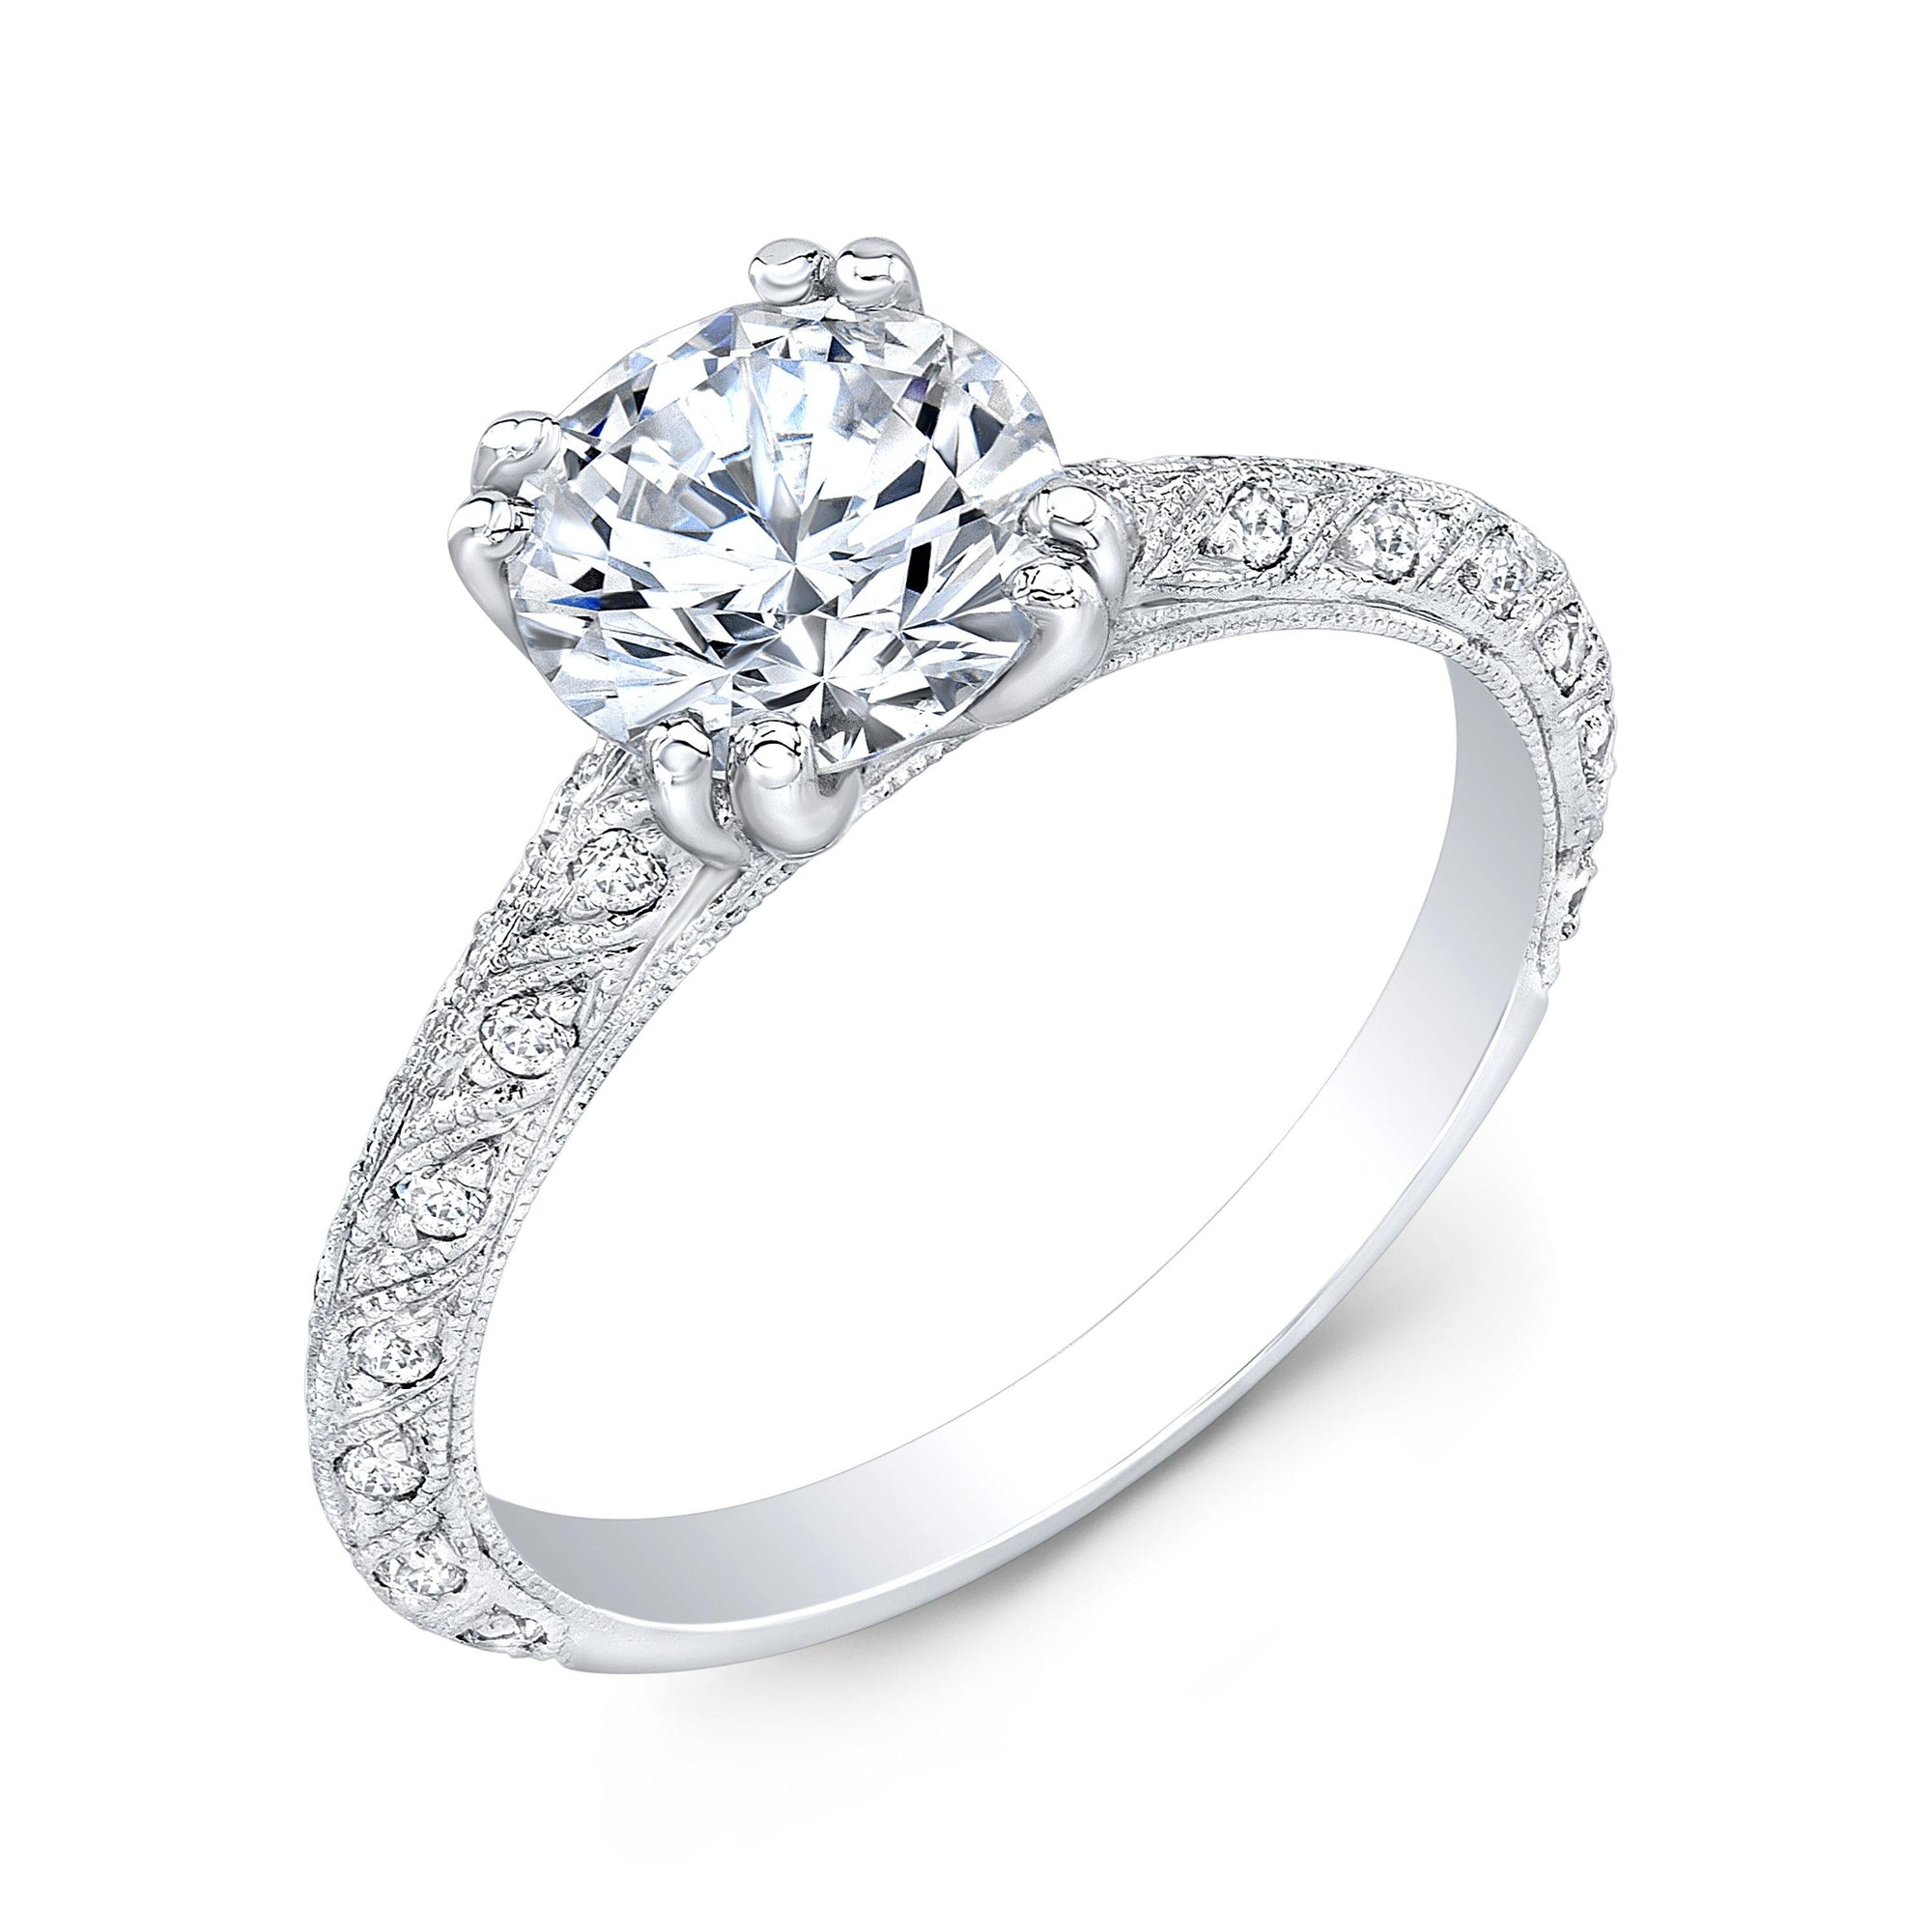 18k Engagement Ring Setting With Vintage Inspired Details - Harby Jewelers